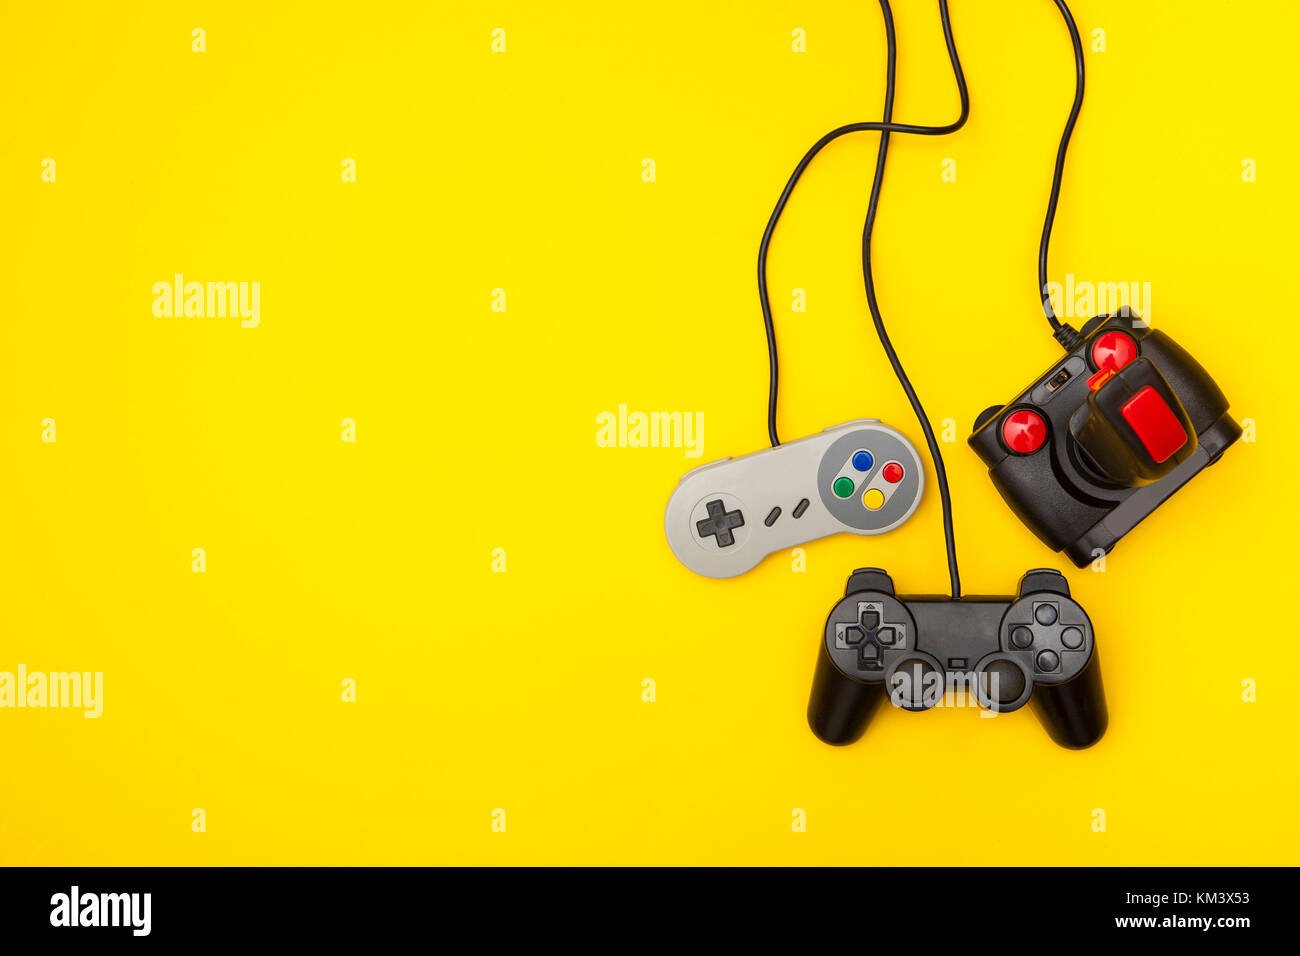 Retro computer gaming controllers on a bright yellow background Stock Photo